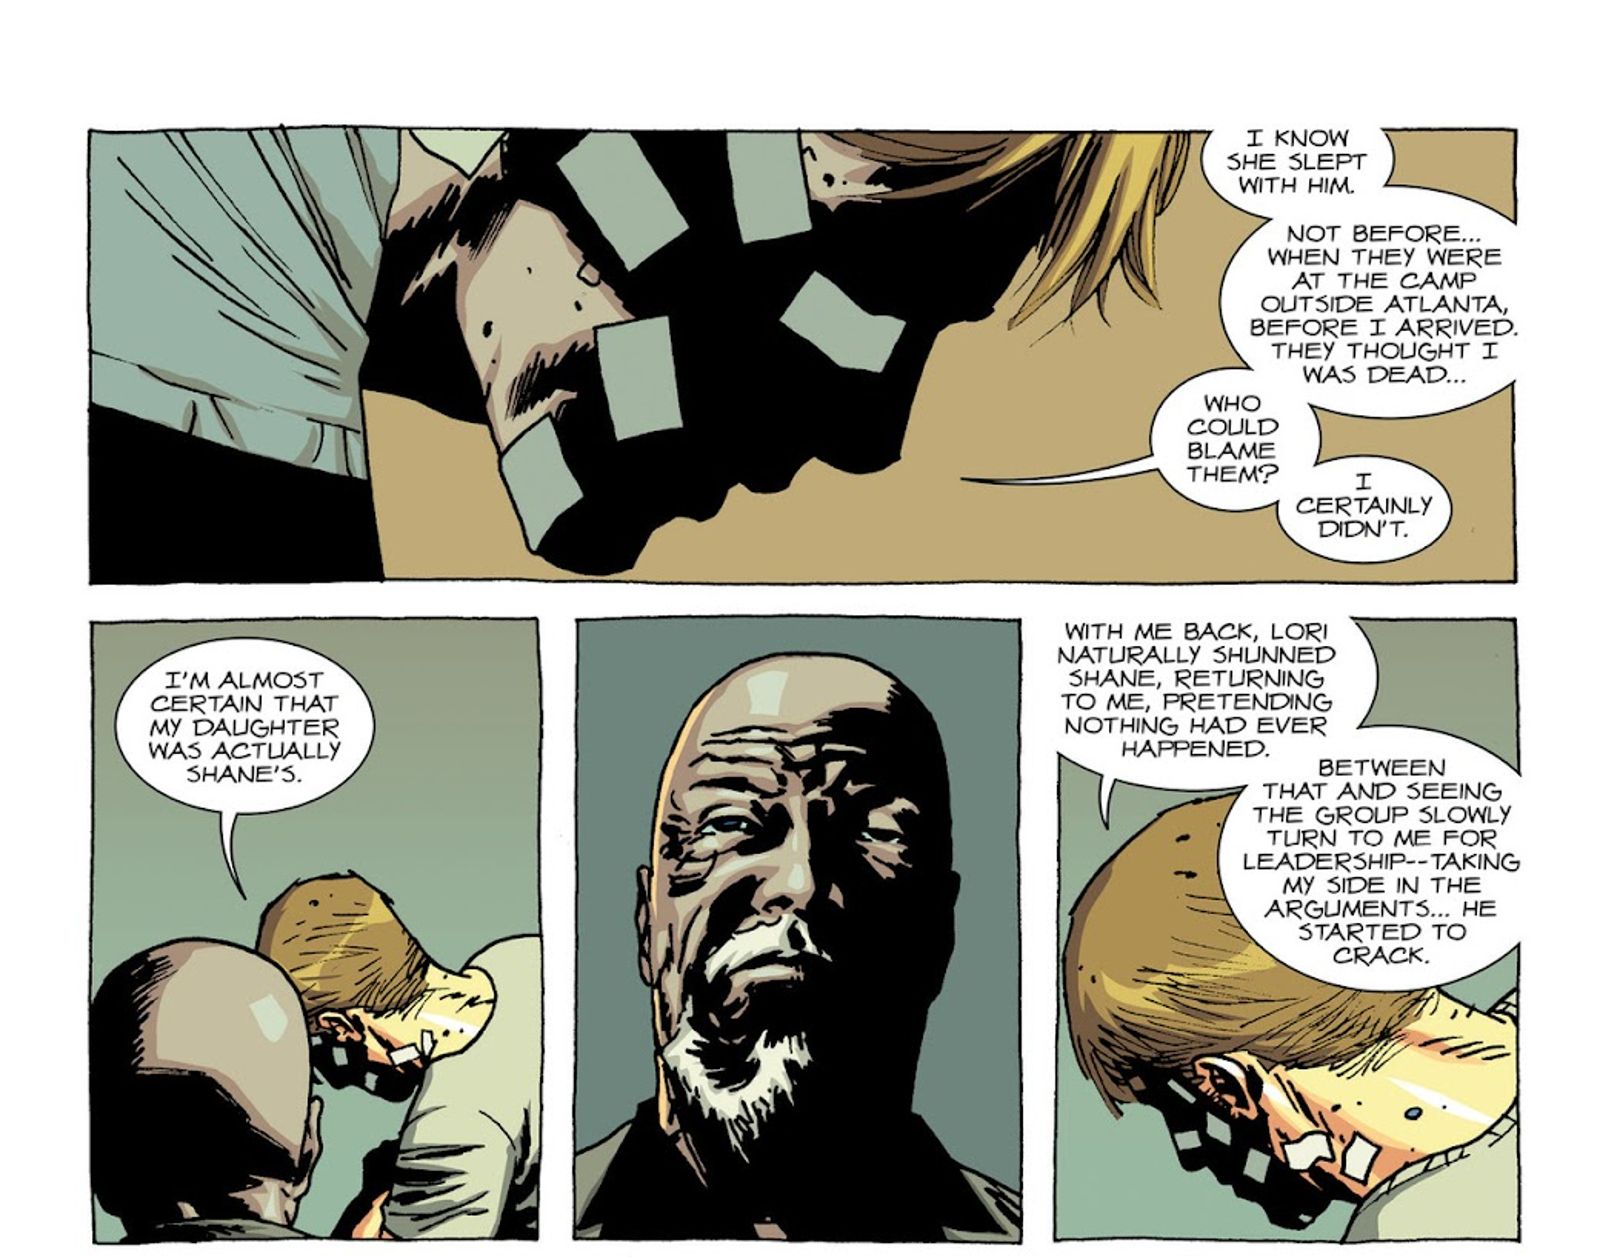 Walking Dead #75, Rick opens up to Douglas Monroe about Shane, Lori, and their baby